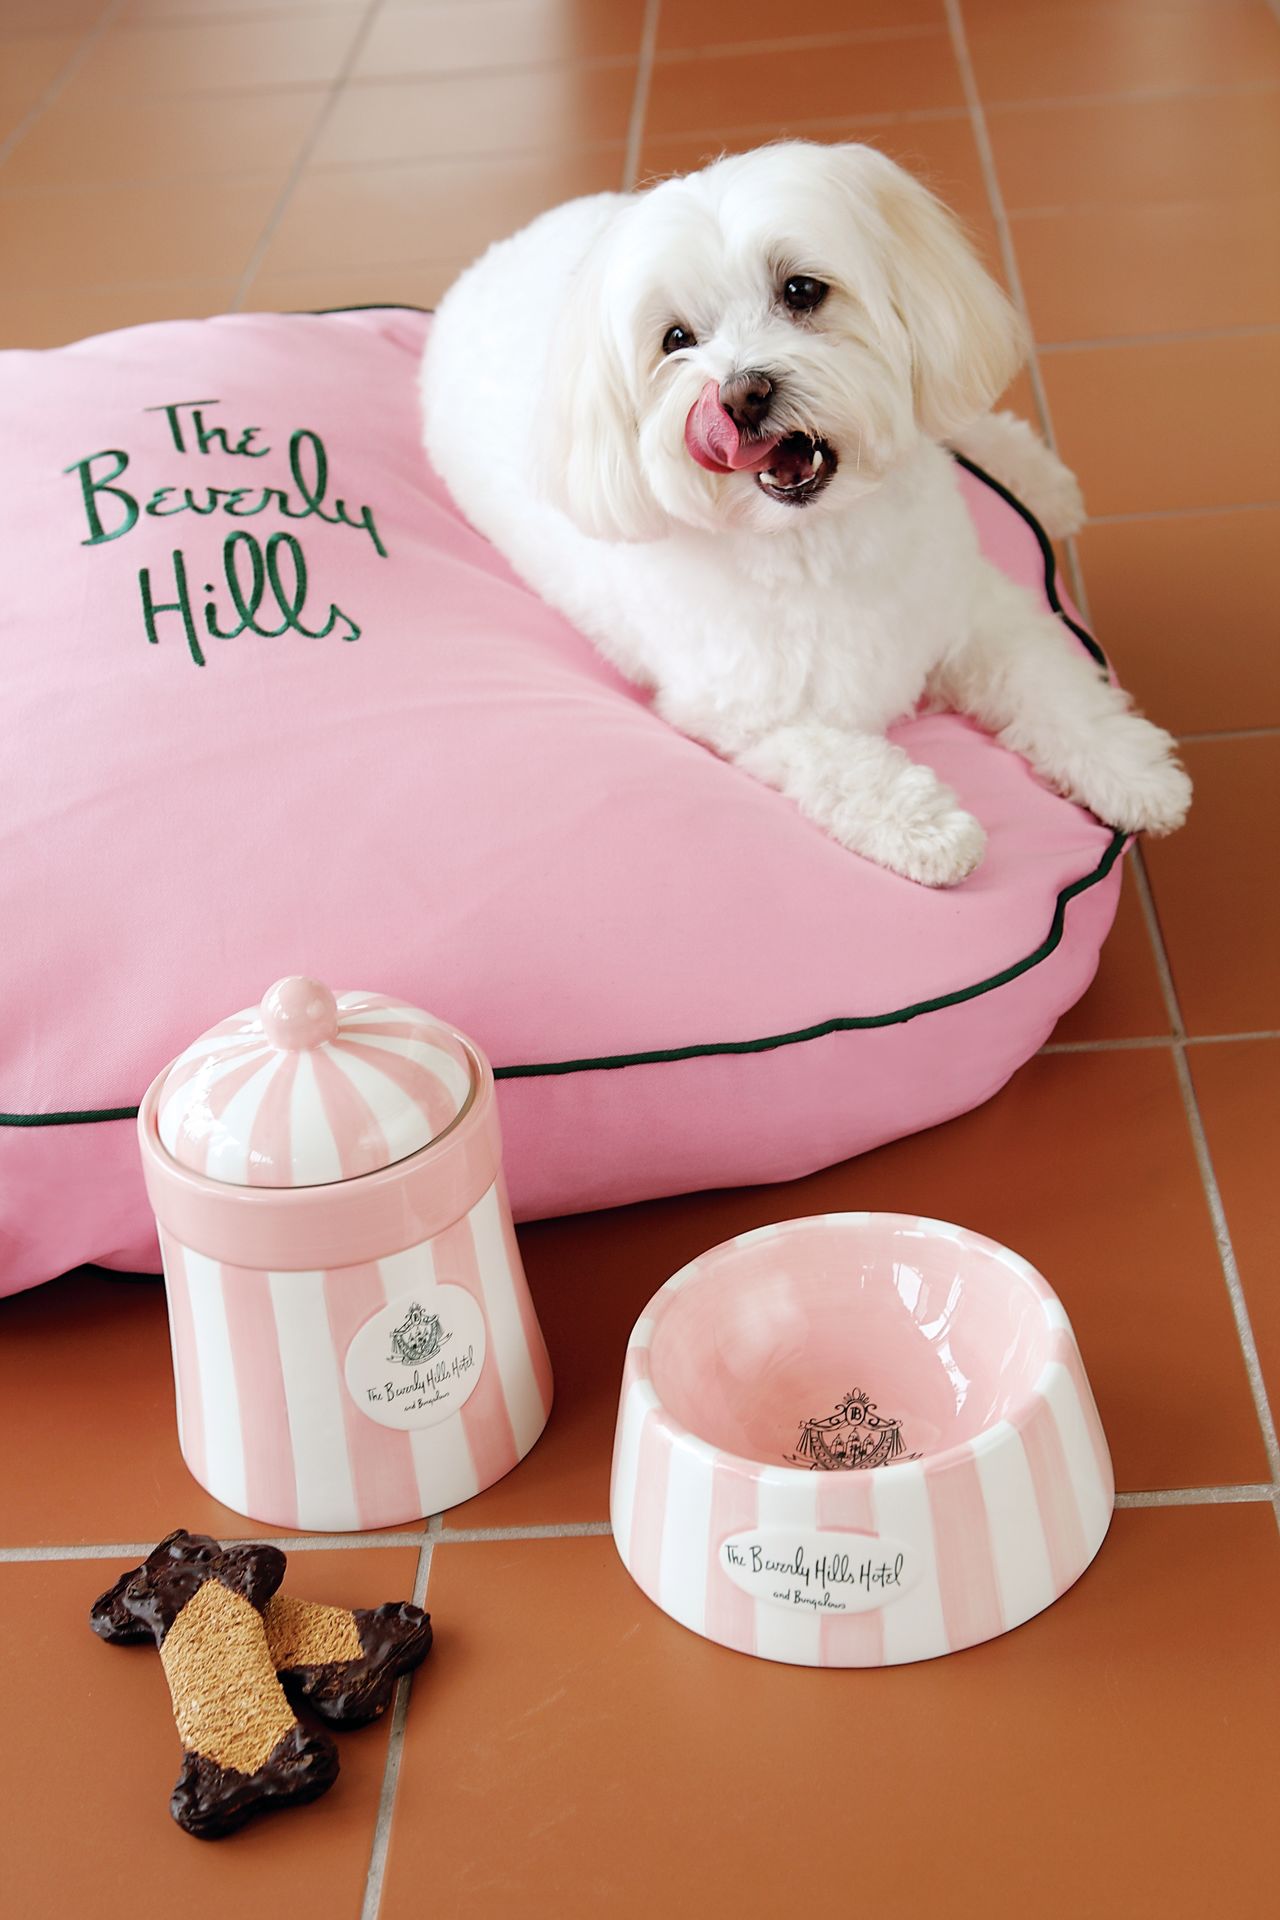 The people aren't the only pampered guests at the Beverly Hills Hotel. Pooches are treated to personalized pillows and dishes and special bone-shaped biscuits.